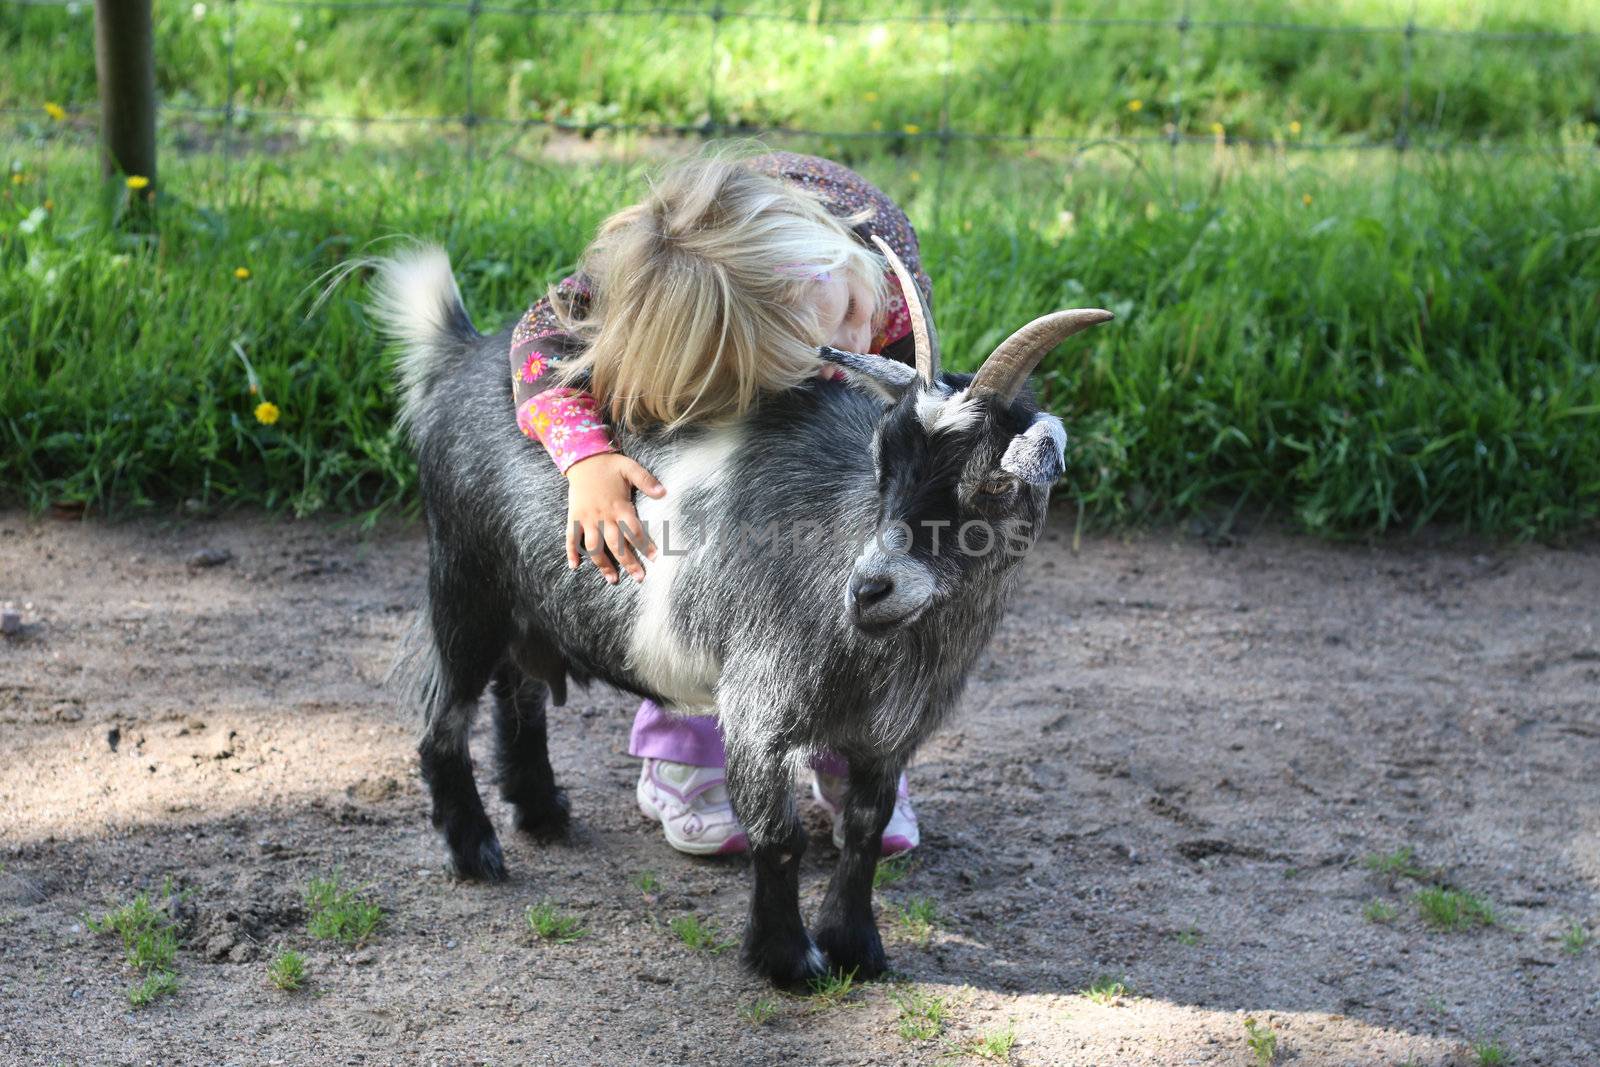 A toddler hugging a billy goat at the children's zoo